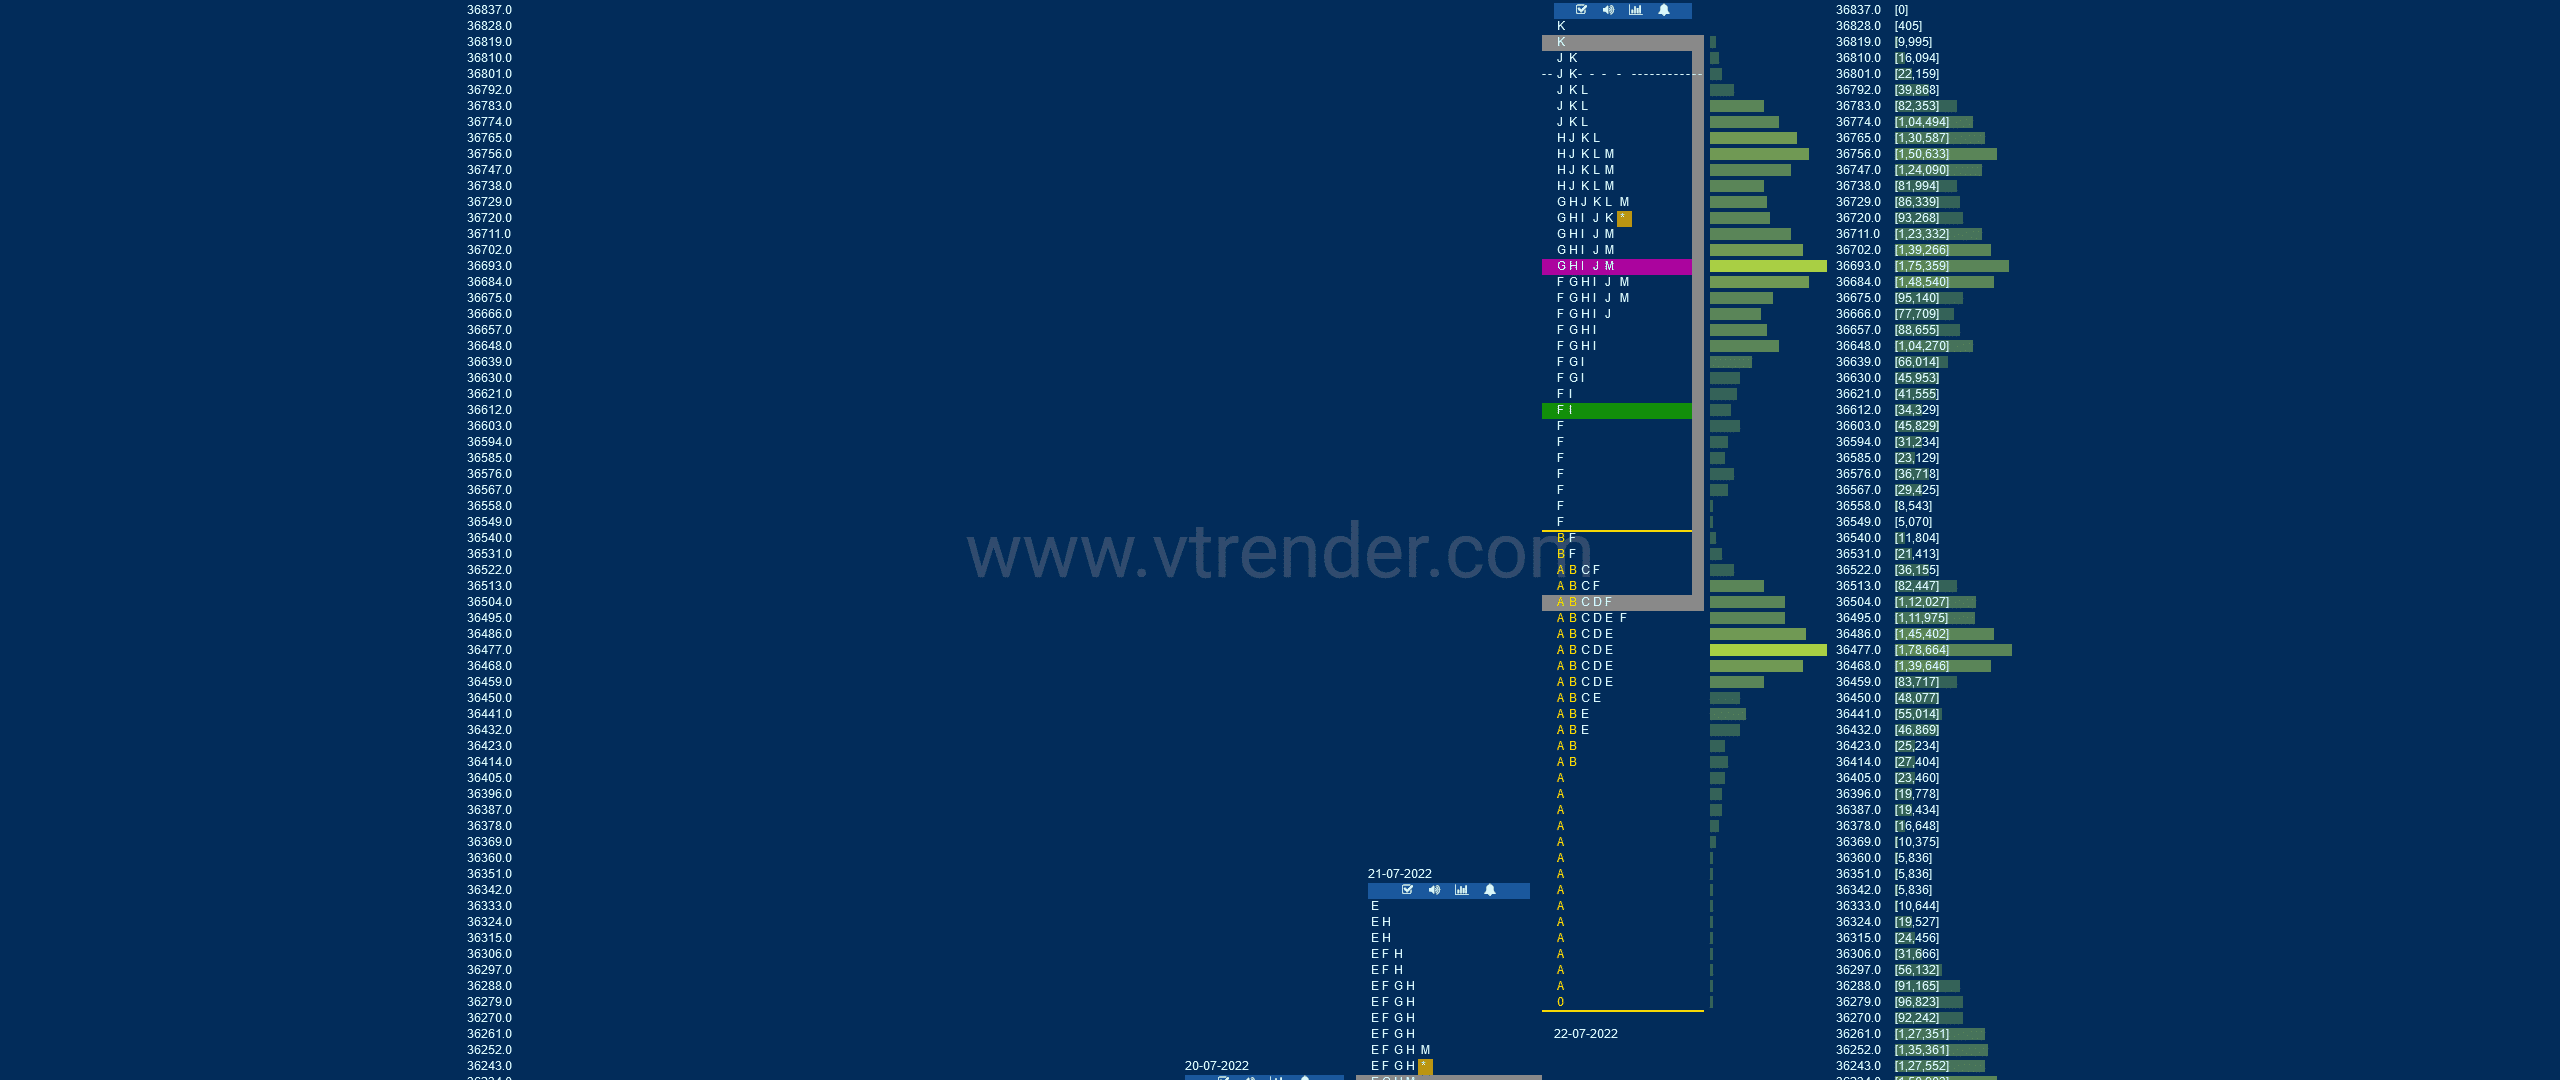 Bnf 16 Market Profile Analysis Dated 22Nd Jul 2022 Banknifty Futures, Charts, Day Trading, Intraday Trading, Intraday Trading Strategies, Market Profile, Market Profile Trading Strategies, Nifty Futures, Order Flow Analysis, Support And Resistance, Technical Analysis, Trading Strategies, Volume Profile Trading